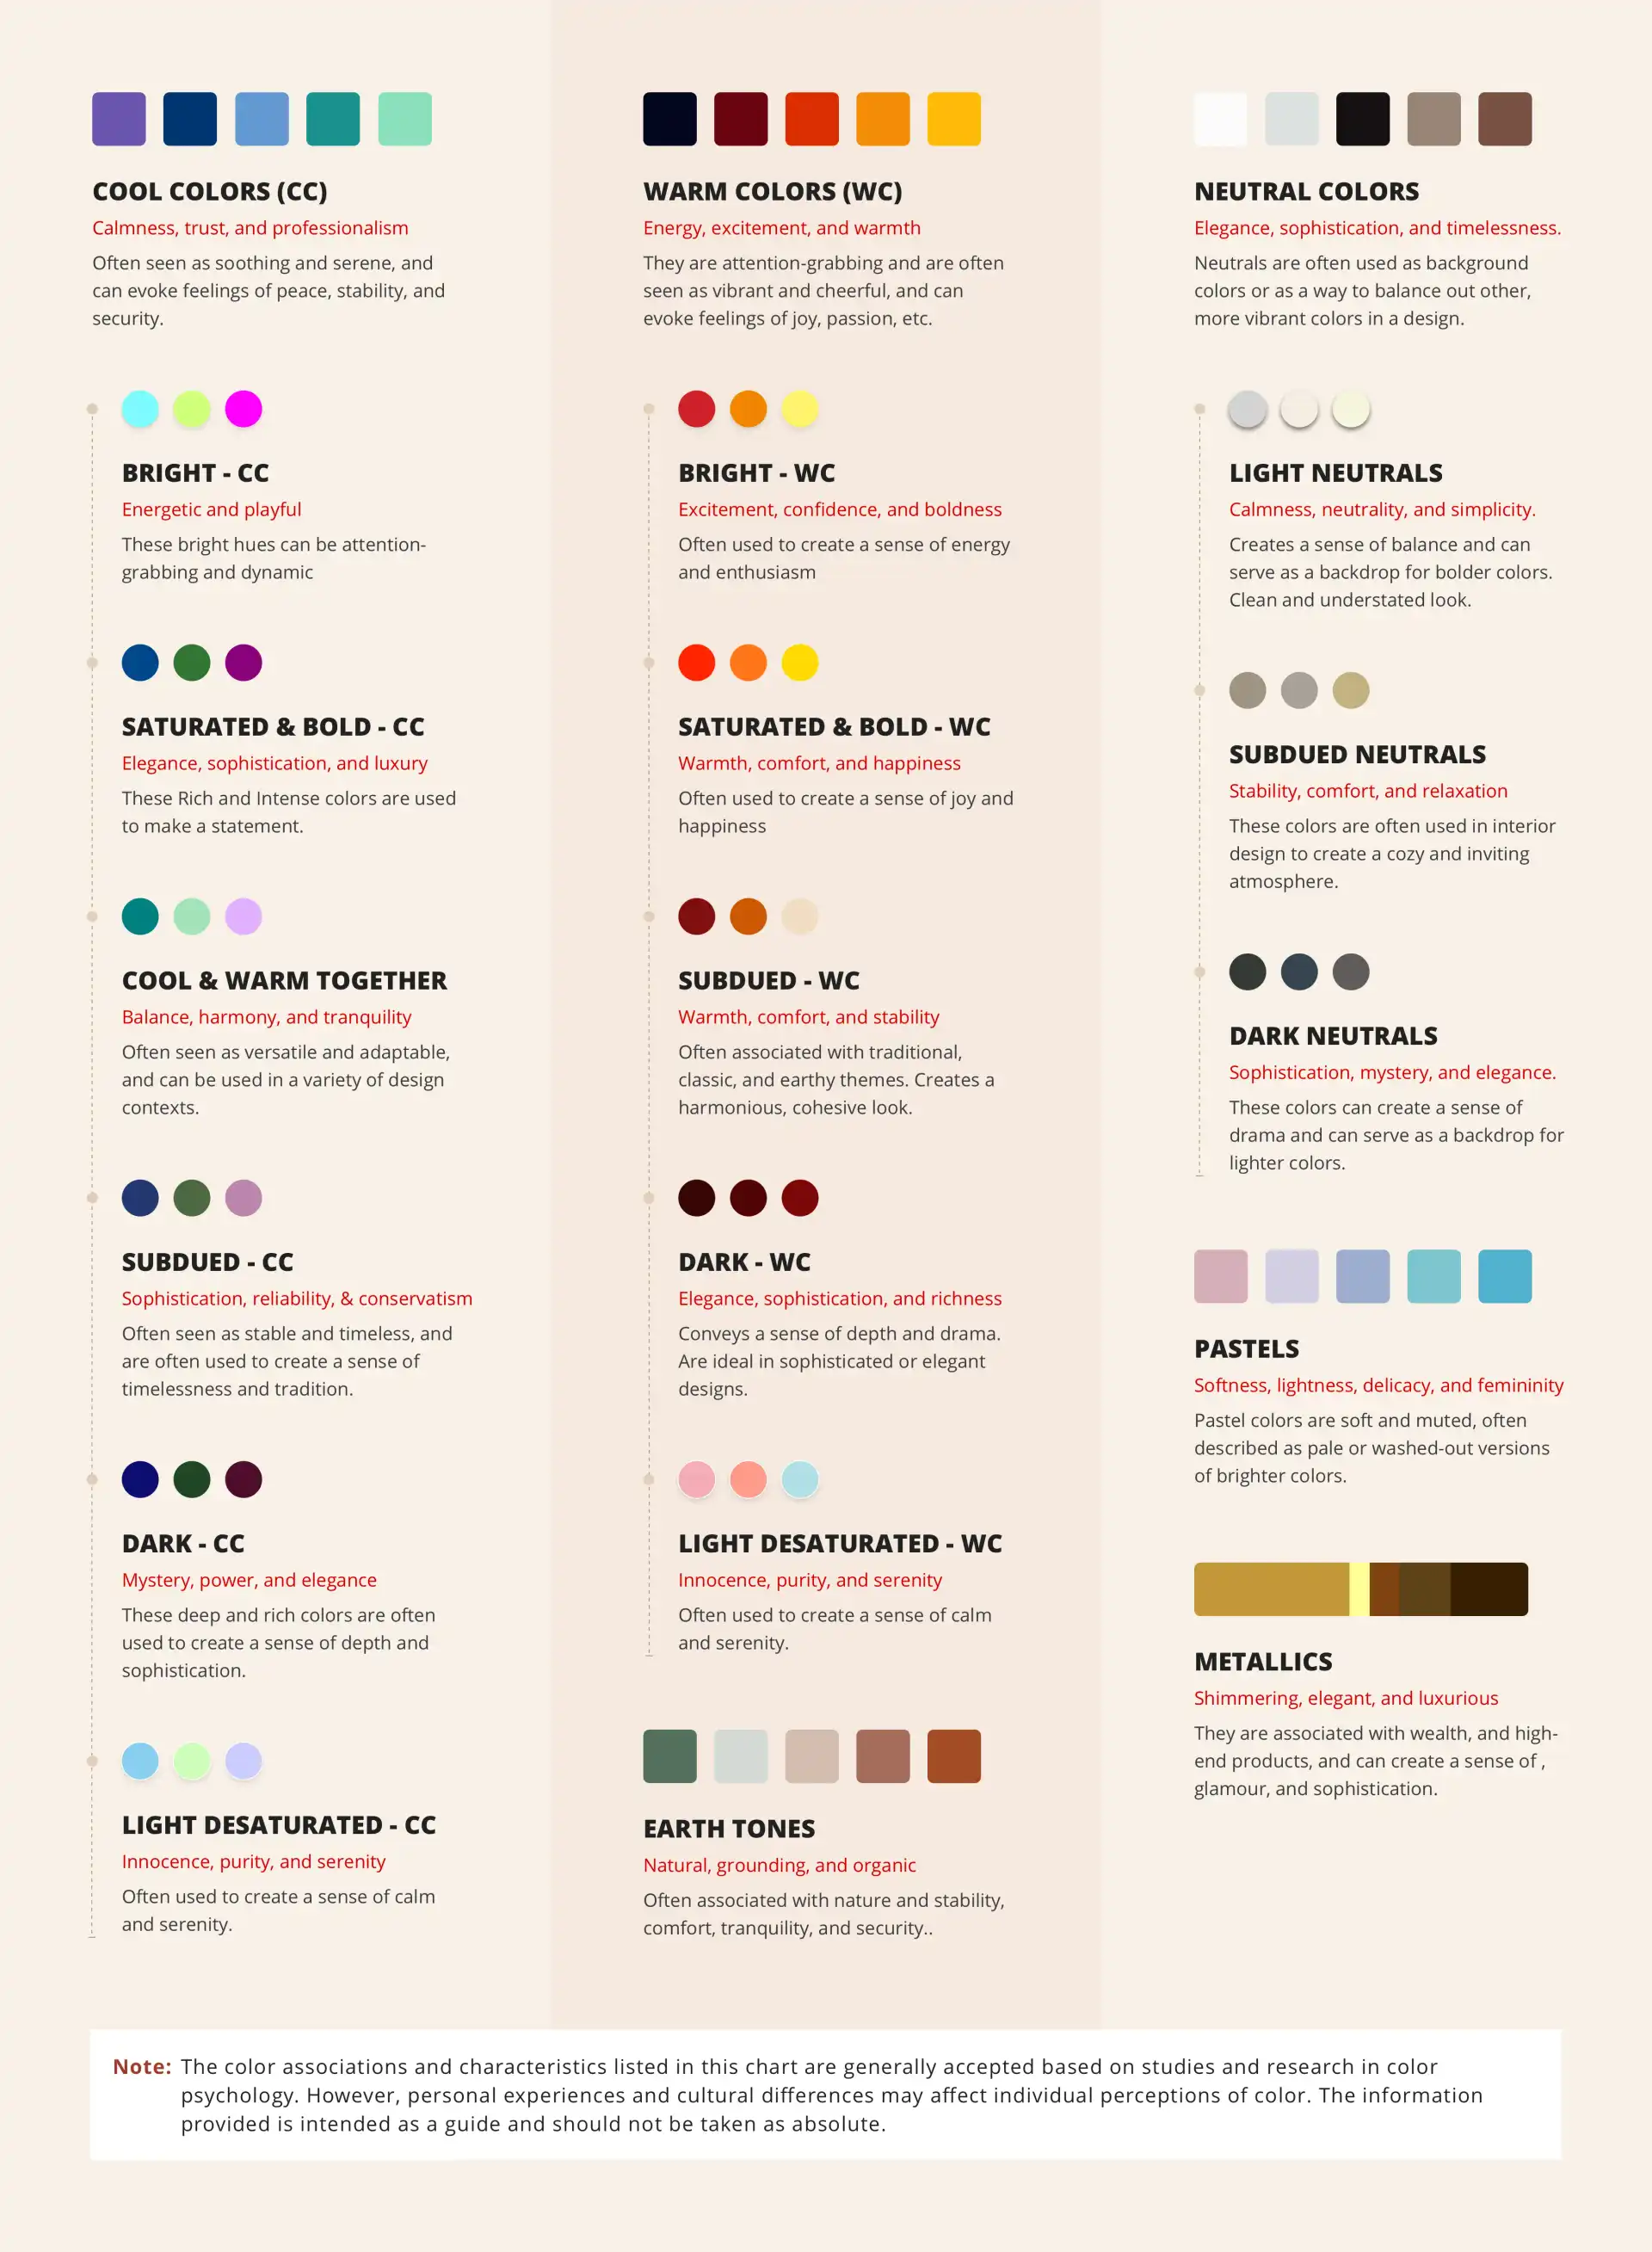 Table showing different color categories including cool, warm, neutrals, earthy, pastel, and metallic colors with their associated characteristics. The table provides a brief description of each color category, including the emotions they evoke and the type of brand personality they convey. Image by Naif Ekkeri from wowstudio.io